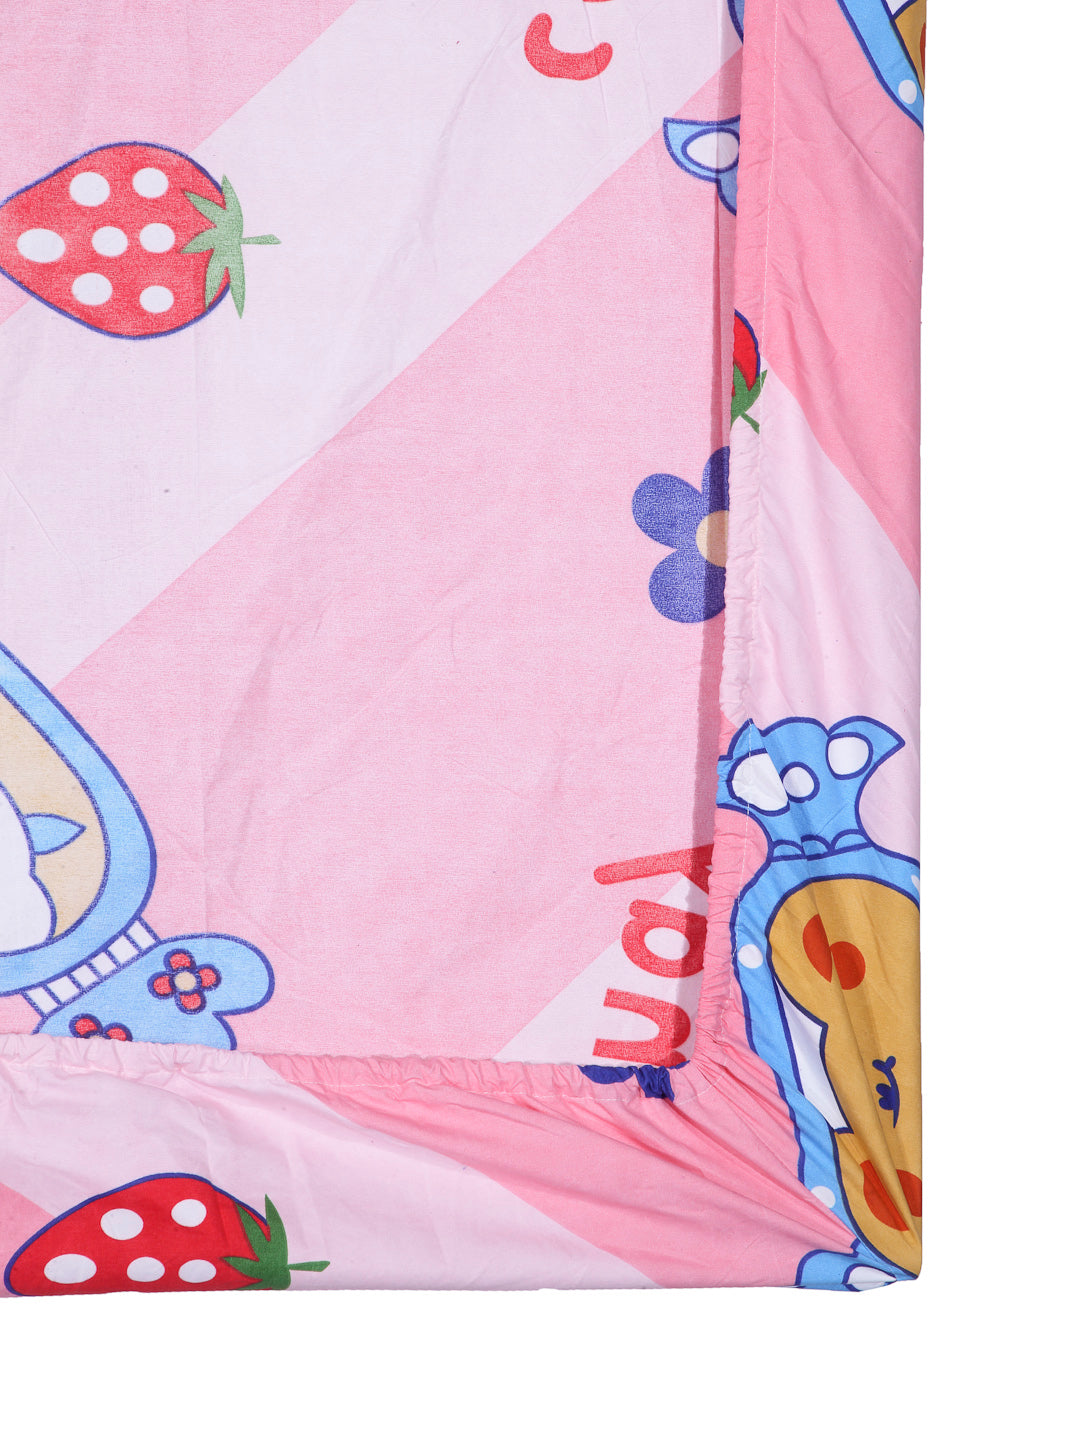 Arrabi Pink Cartoon TC Cotton Blend Single Size Fitted Bedsheet with 1 Pillow Cover (220 X 150 cm)